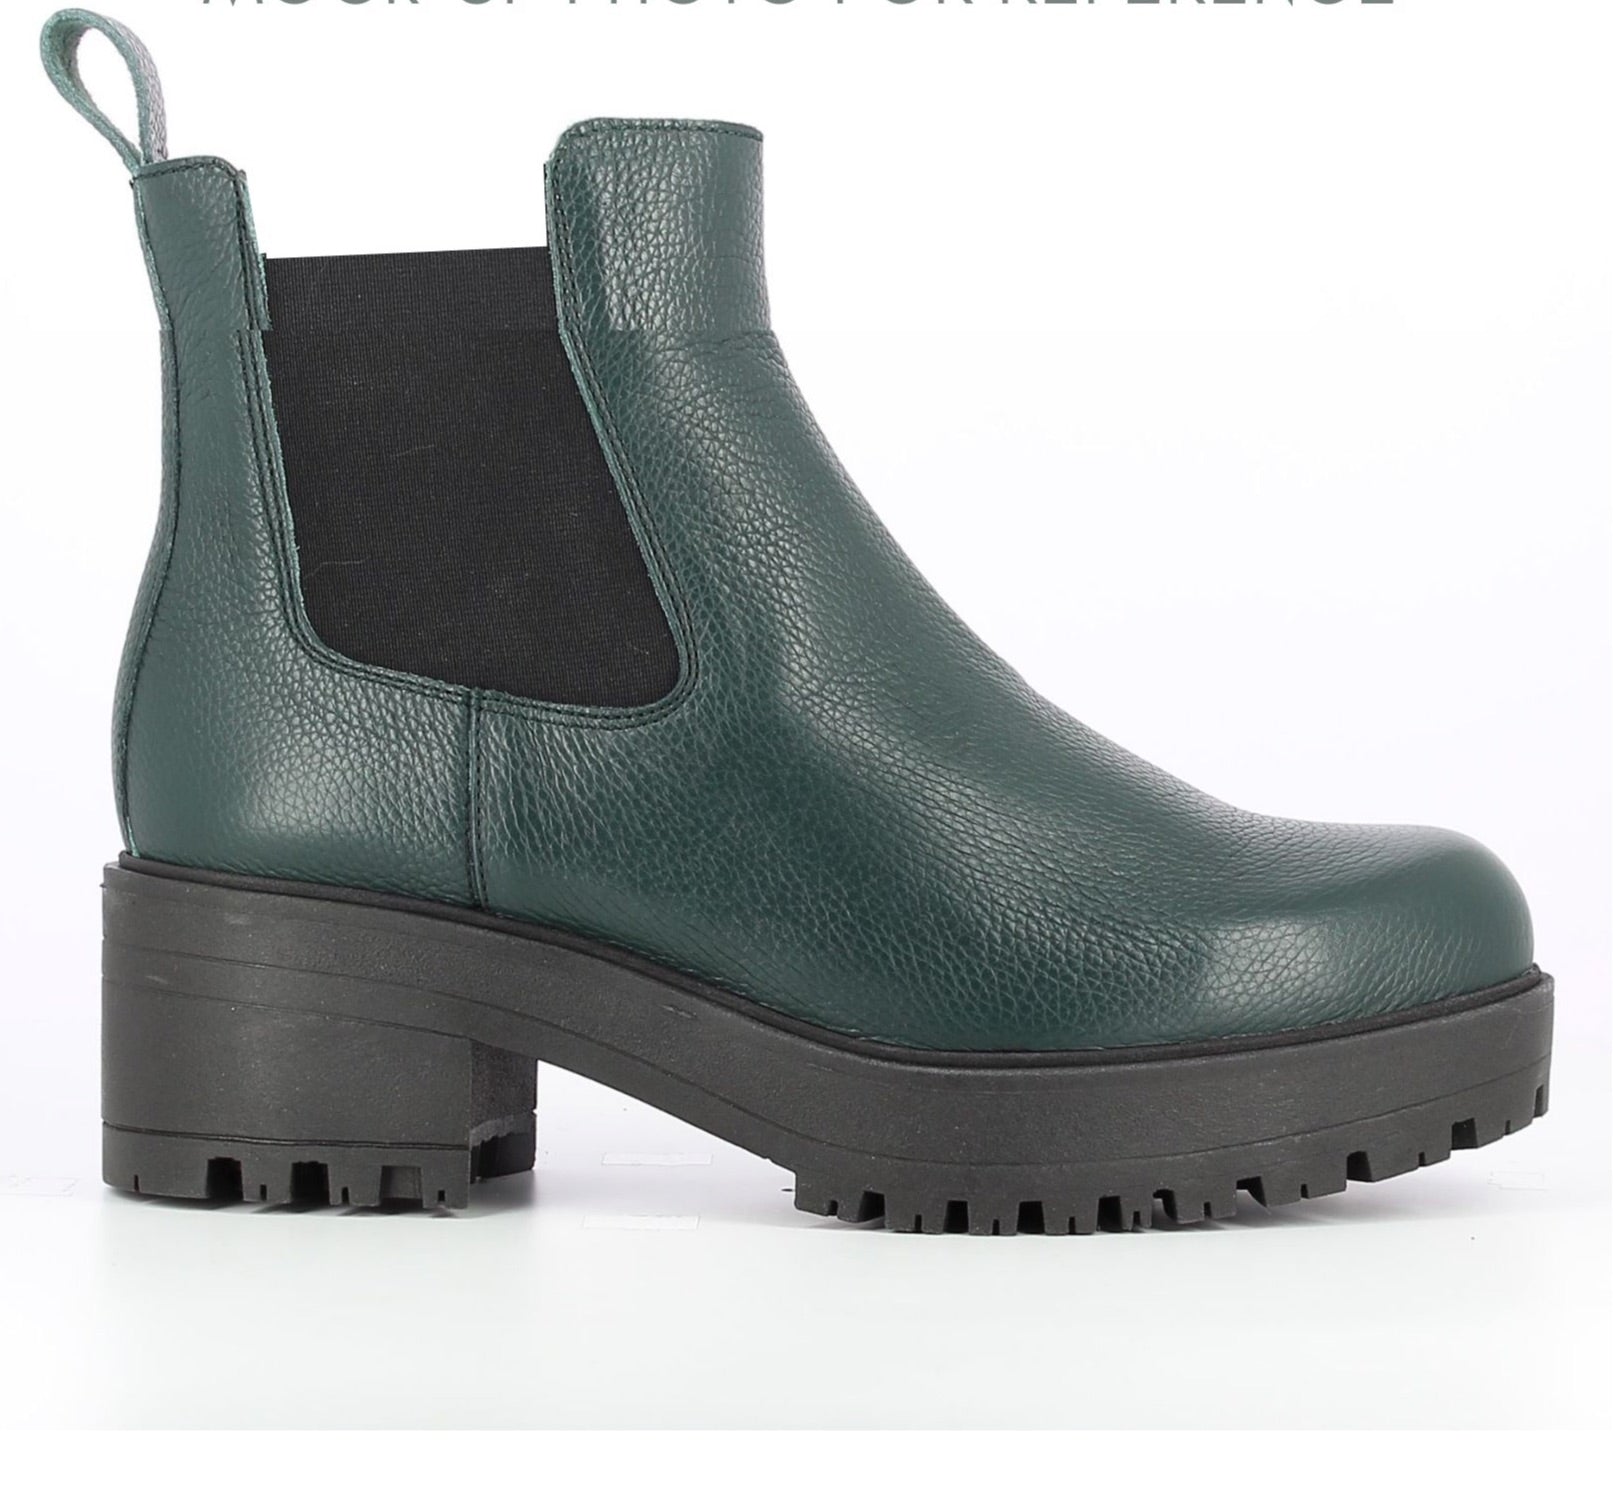 forest green Chelsea boot with a 1 inch platforn 